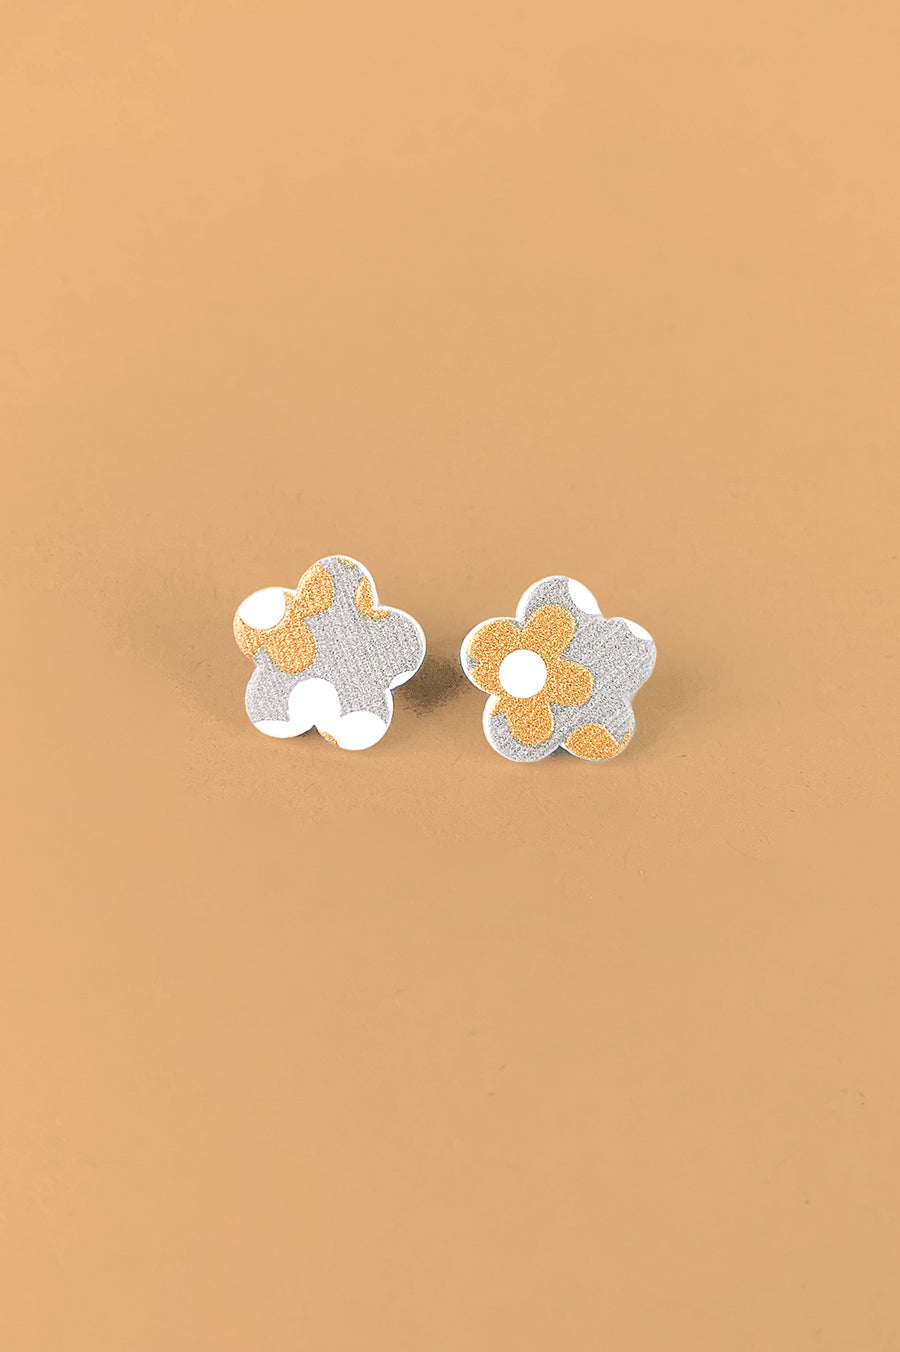 Printed Flower Studs in Floral Mix